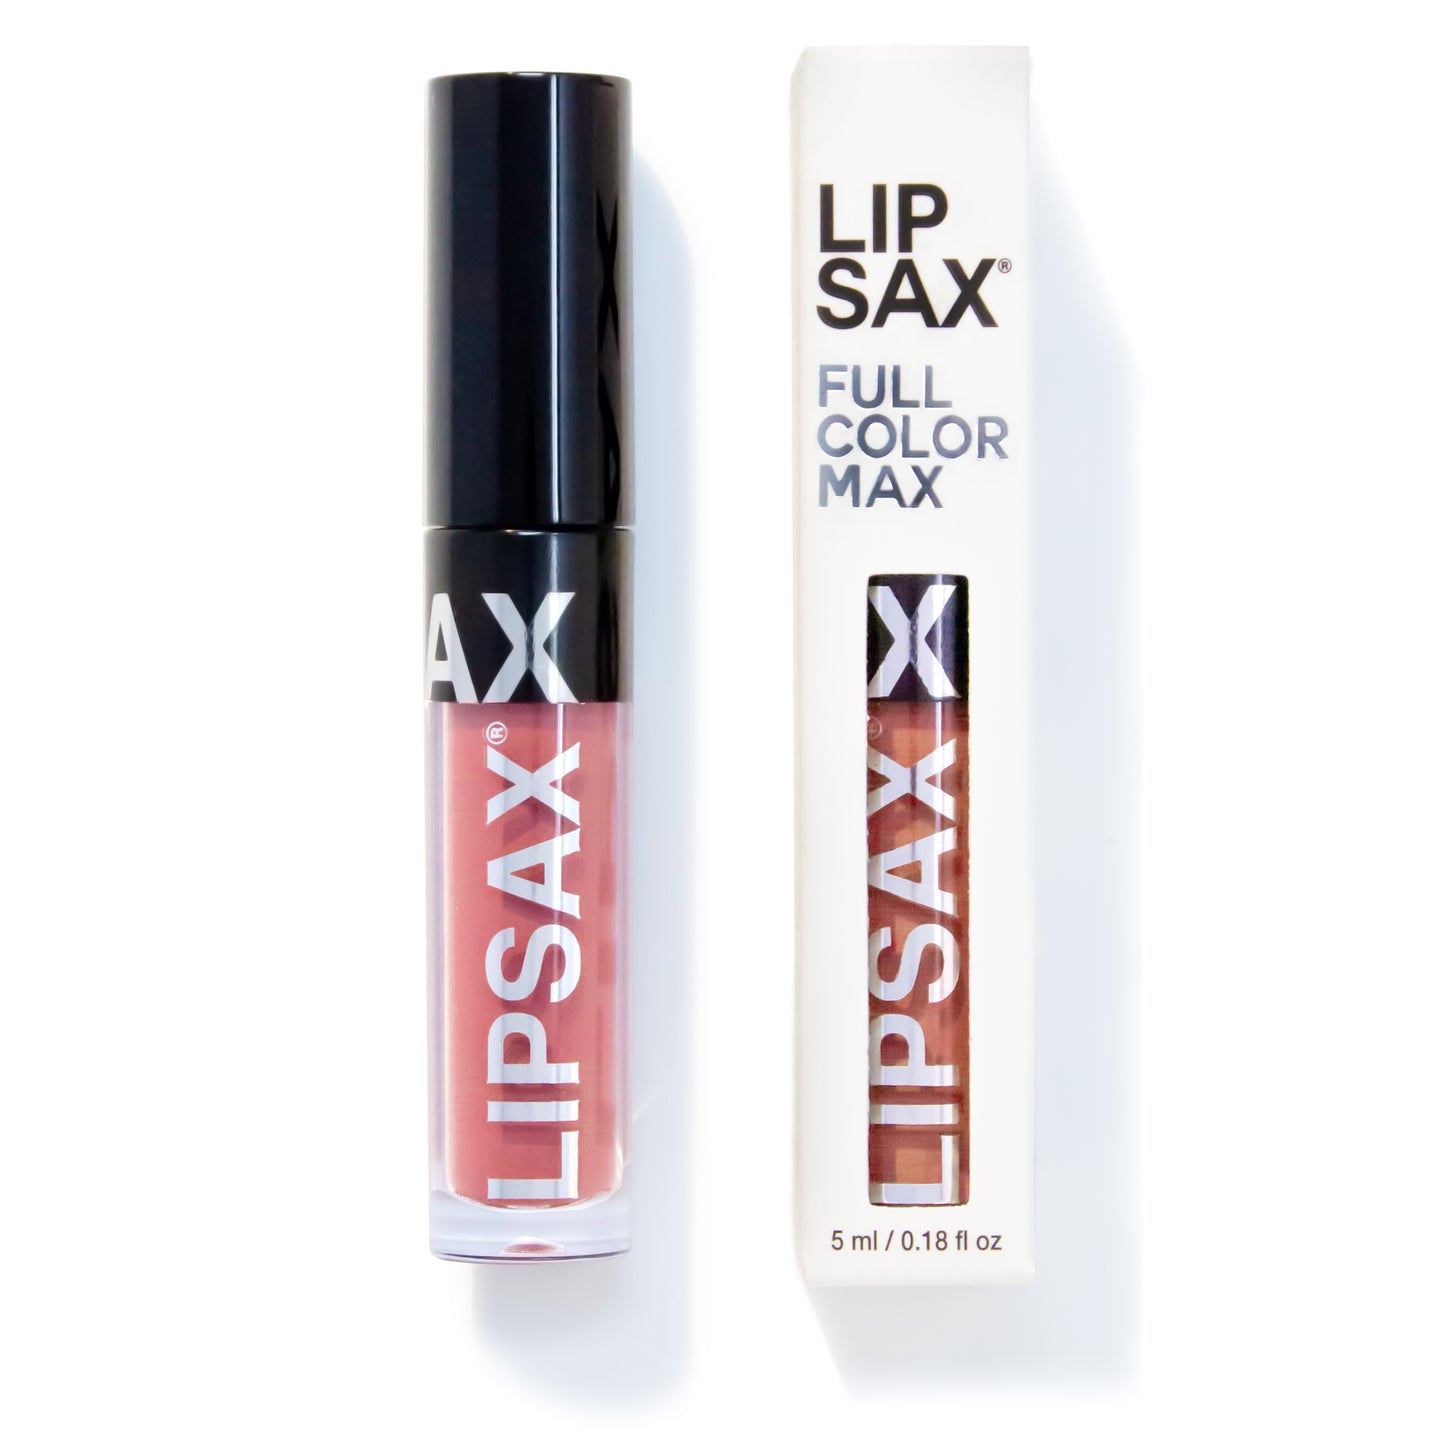 Lipsax Undressed bottle and box